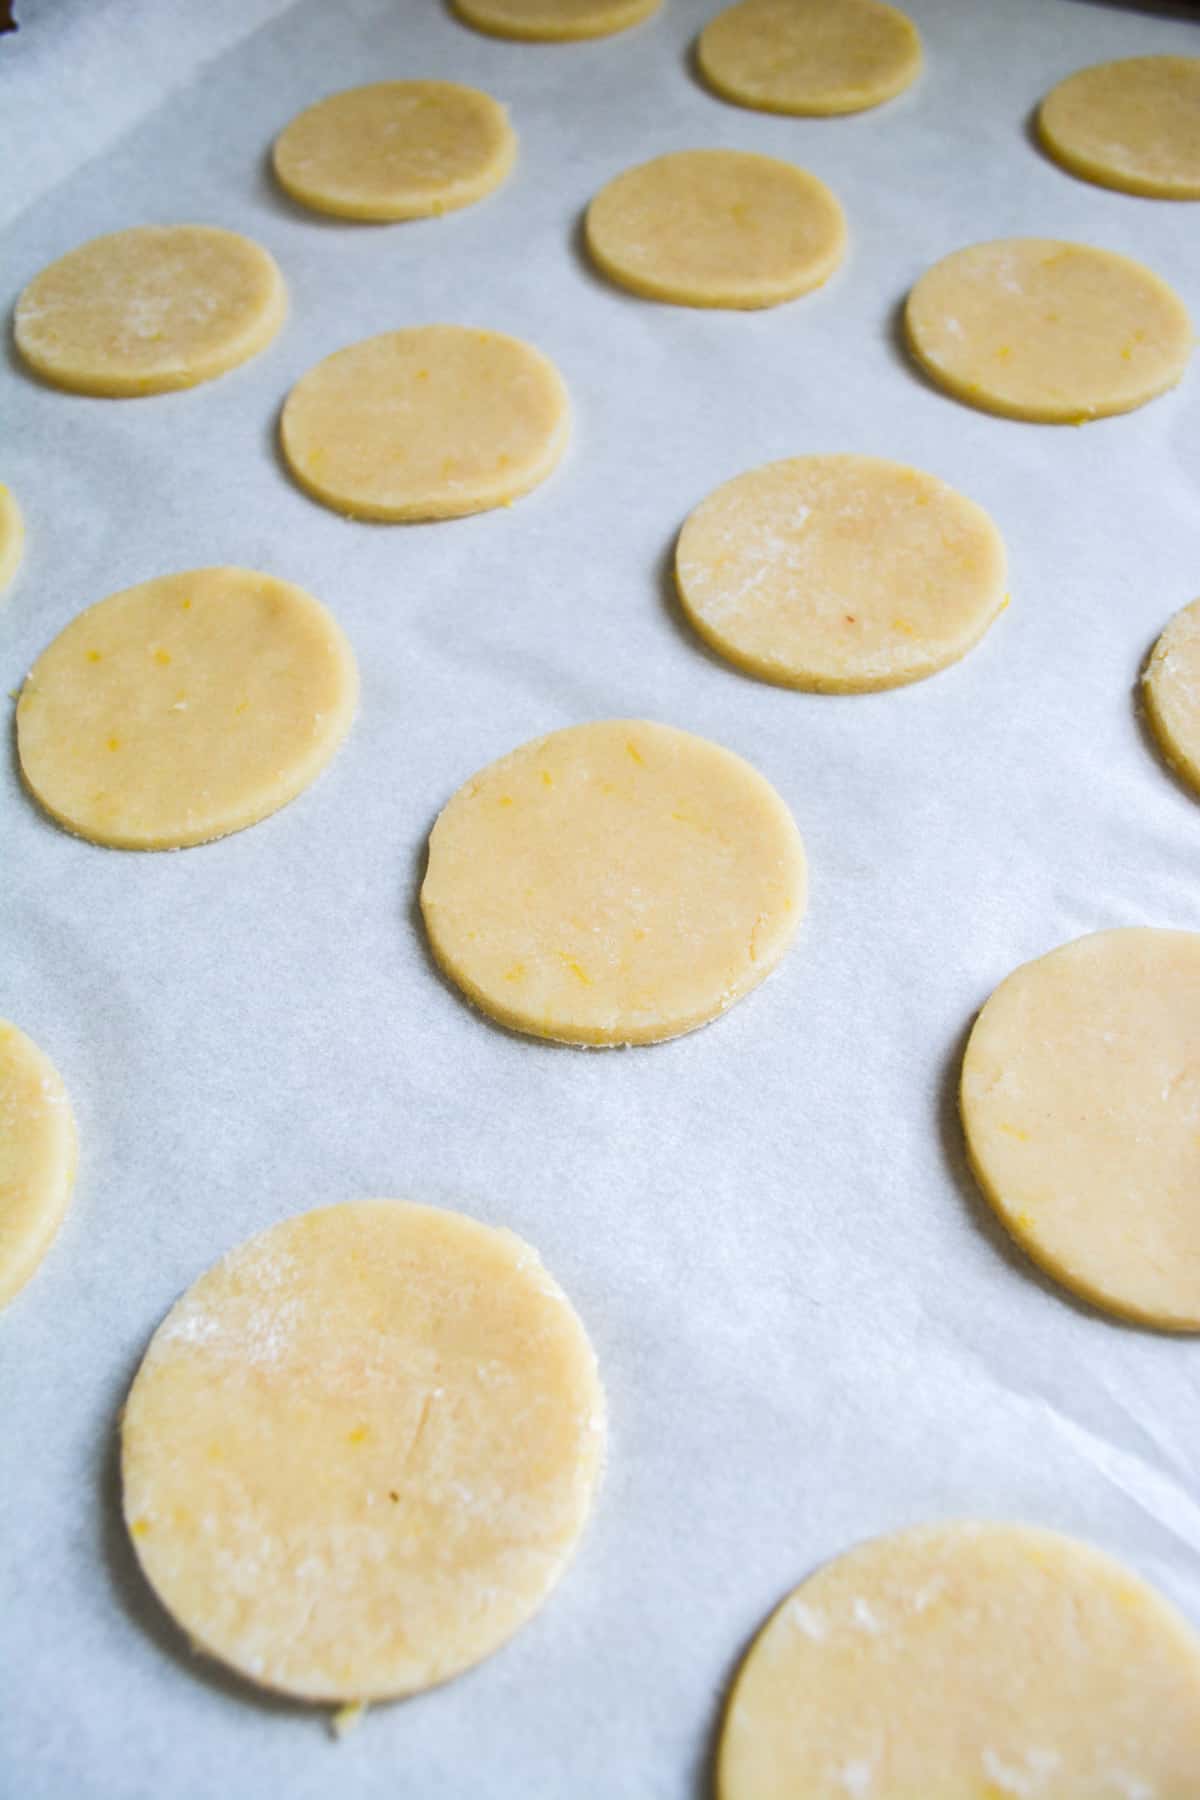 The bottoms of the cookies on a parchment lined baking sheet.